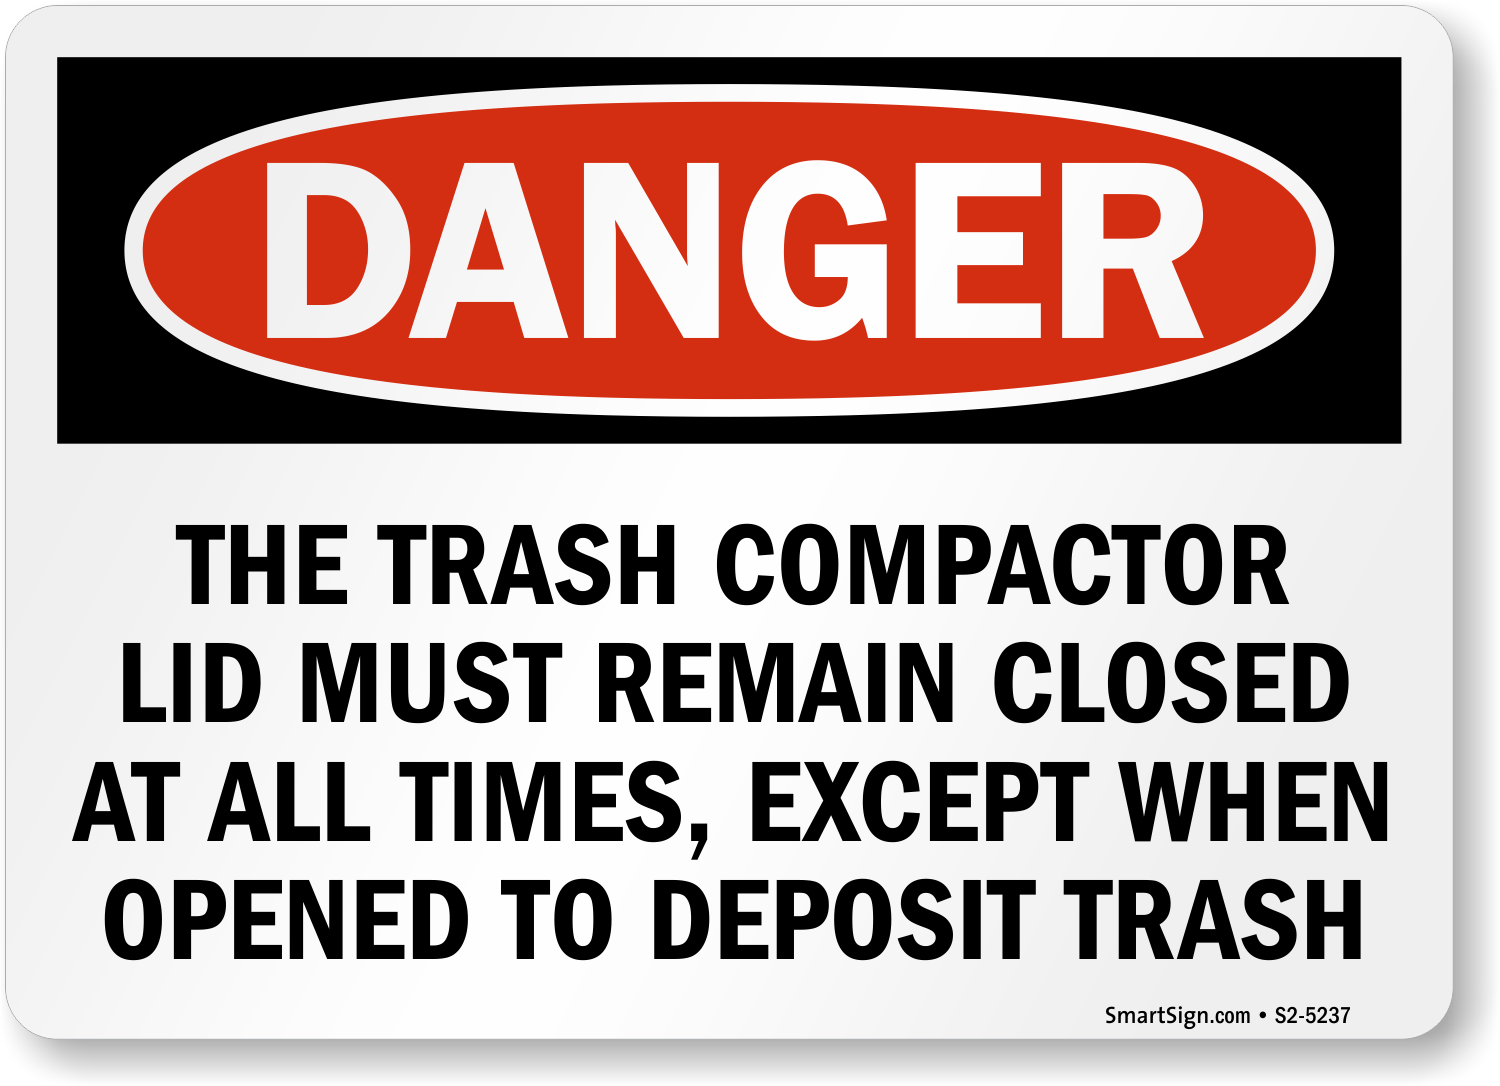 Dumpster Signs - Dumpster Rules Signs at Best Prices